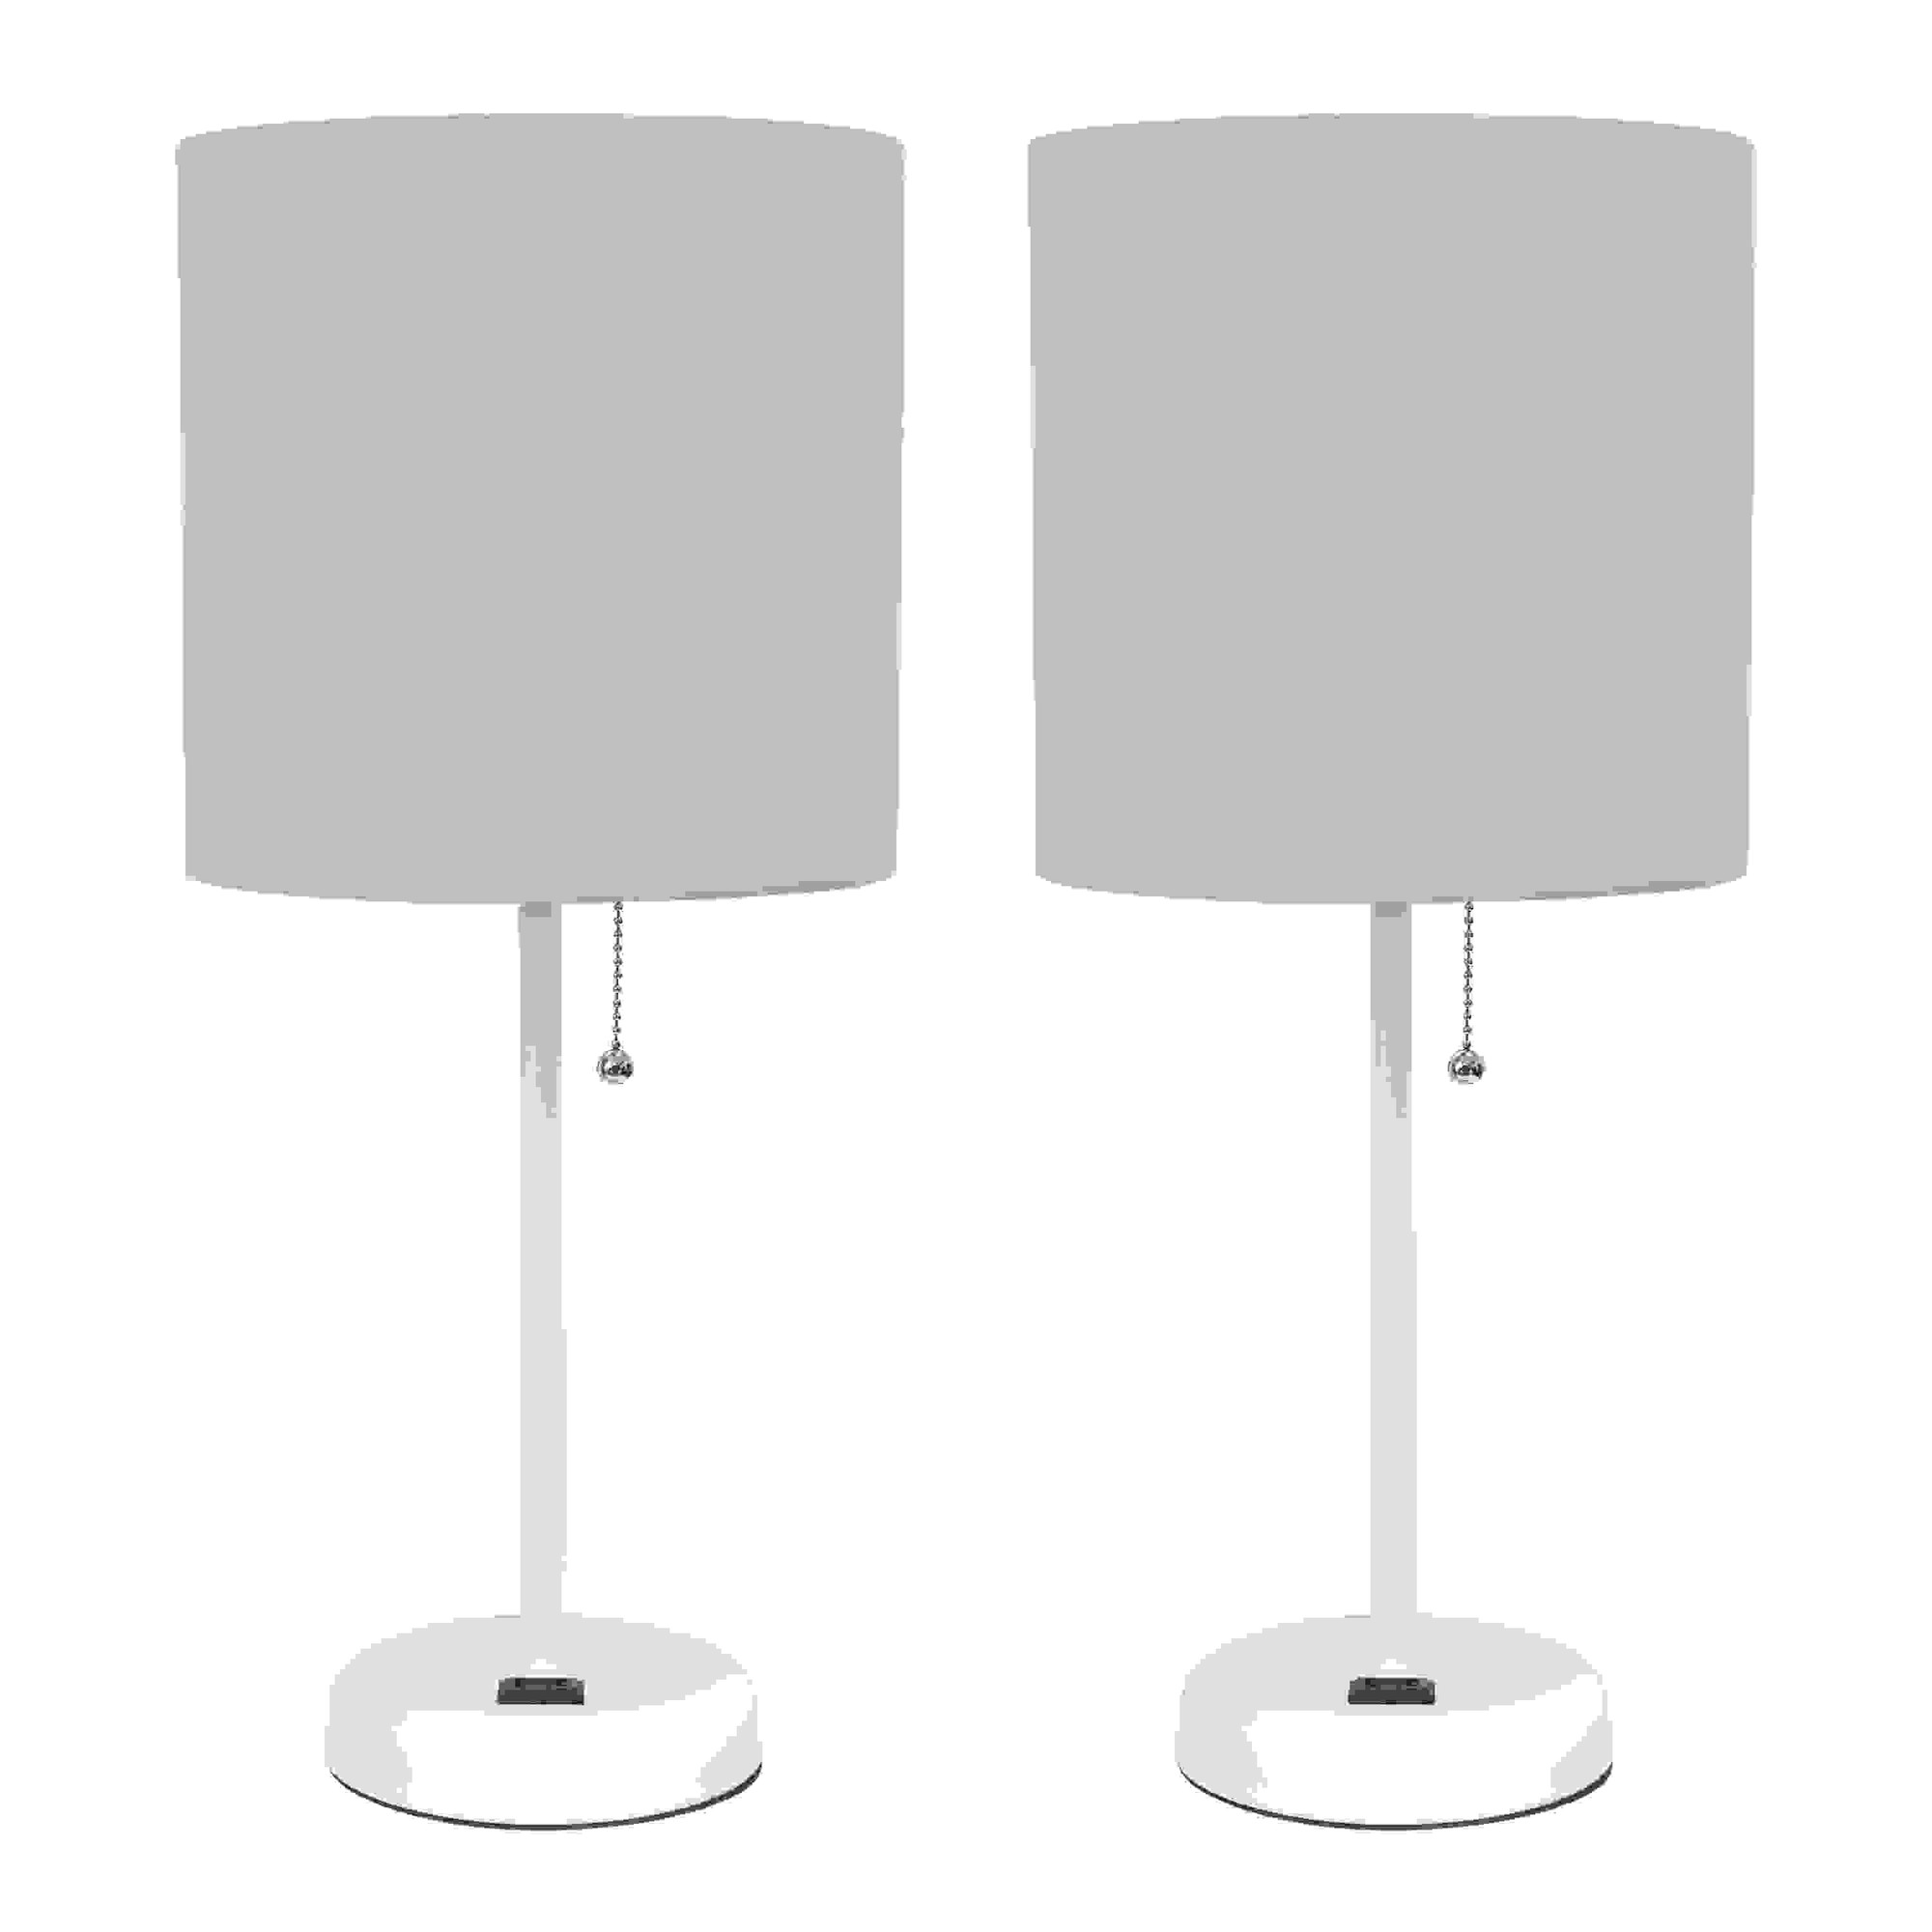 Simple Designs White Stick Lamp with Charging Outlet and Fabric Shade 2 Pack Set, Gray